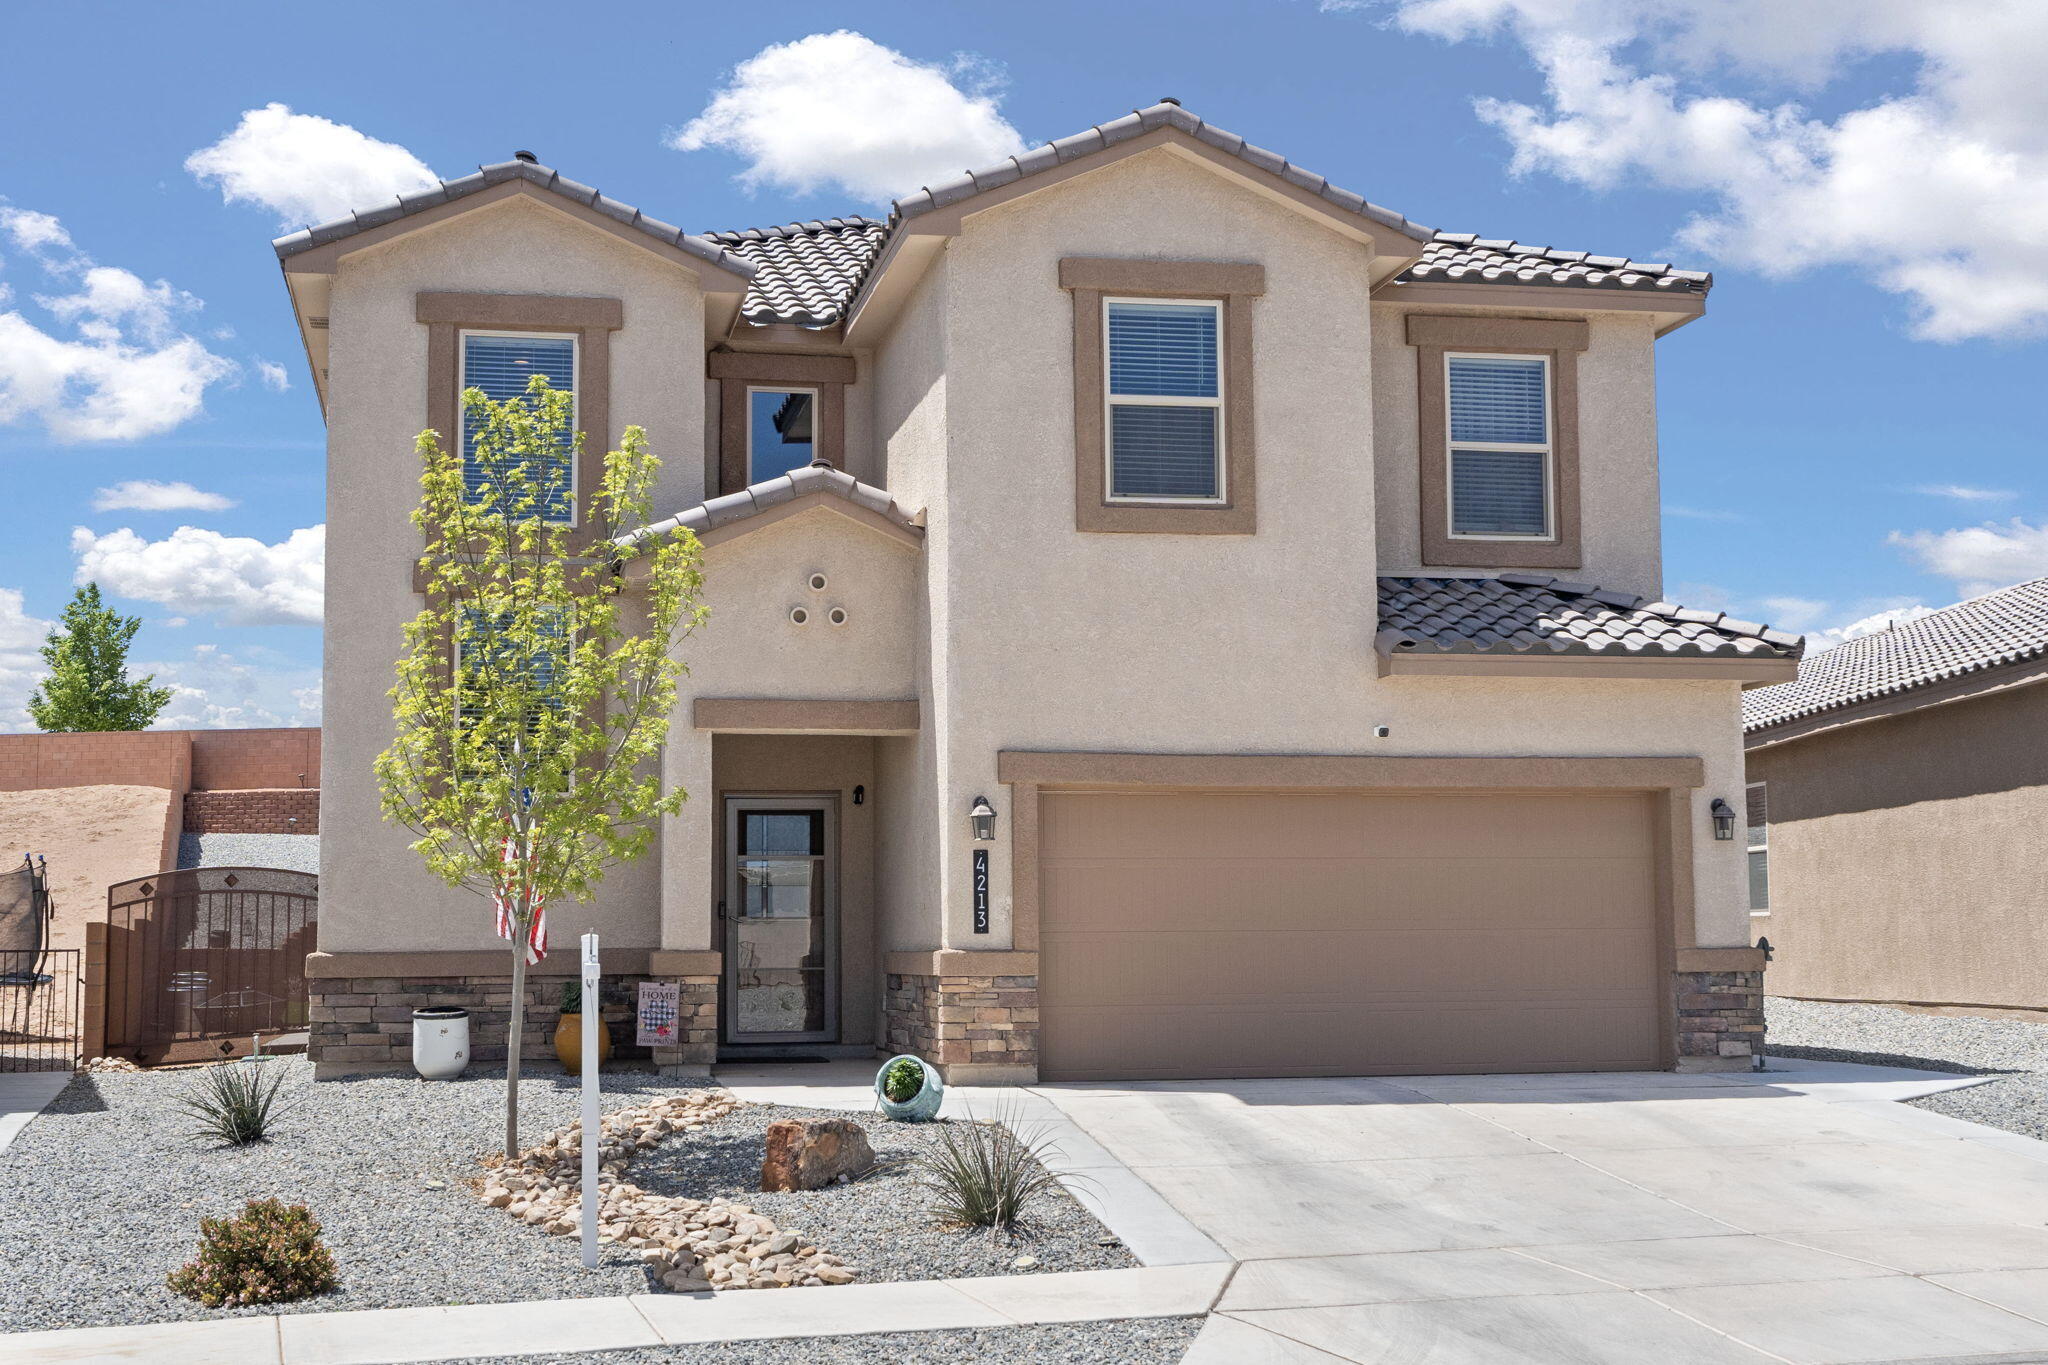 Welcome to this like-new Rio Rancho gem in the sought-after Cleveland Heights subdivision, a compelling alternative to new construction! This home features a modern open floorplan w/ wood-like tile & granite countertops. The kitchen boasts stainless appliances & a large island, perfect for gatherings. The main level includes a primary suite w/ dual sinks, large walk-in shower & a spacious closet. Enjoy an oversized pantry & ample storage, enhanced by ceiling fans & recessed lighting. Upstairs, a cozy loft offers space for a home office, play area or additional family room, leading to three additional bedrooms. Step outside to a beautifully landscaped backyard w/ $50K in enhancements, complete w/ a covered patio perfect for outdoor living & enjoying the mountain view! Call us today!!